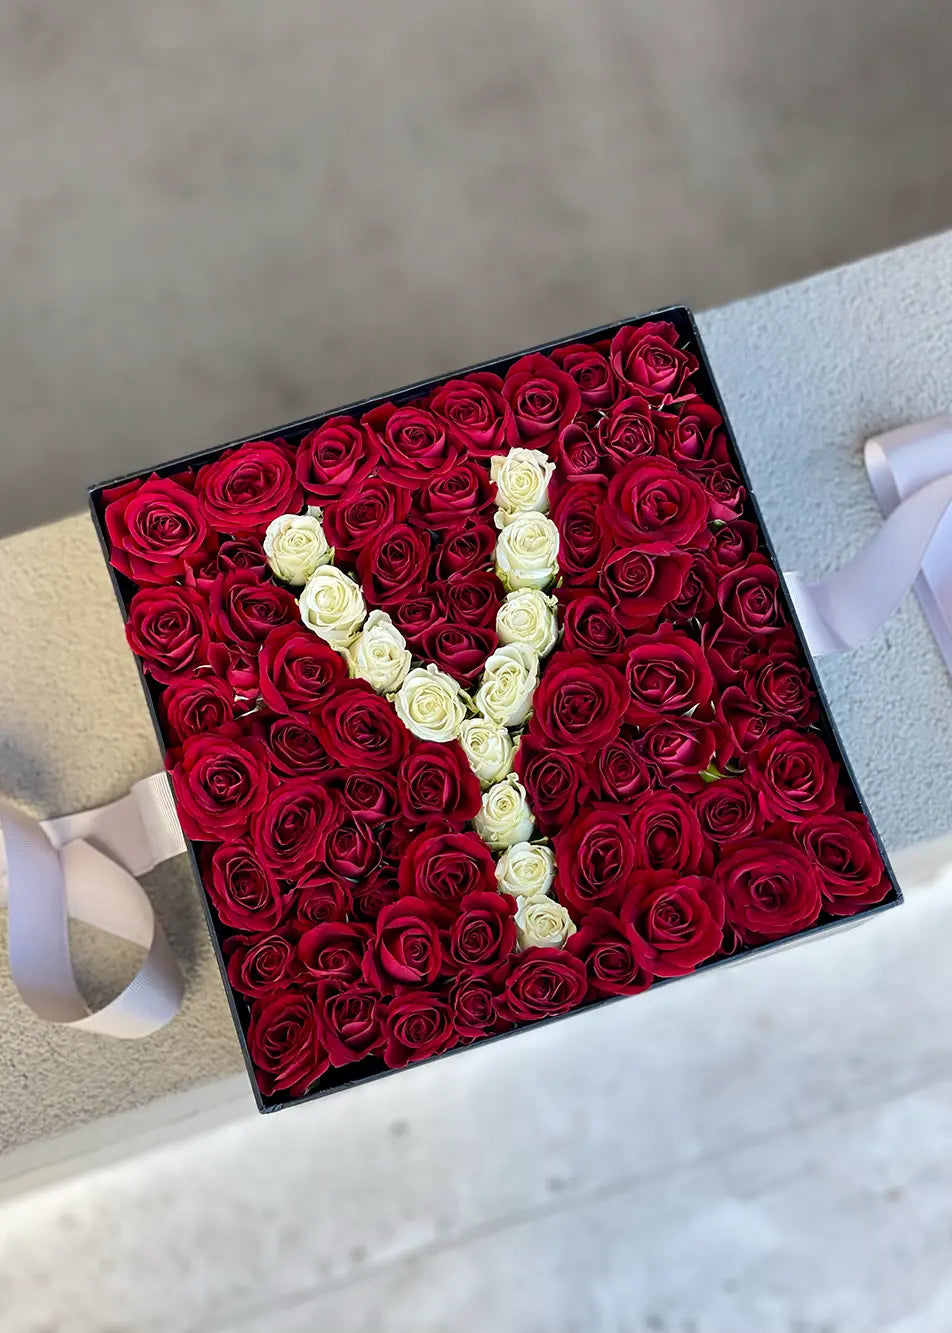 NO. 16. Square Flower Box with Initials (spray roses)